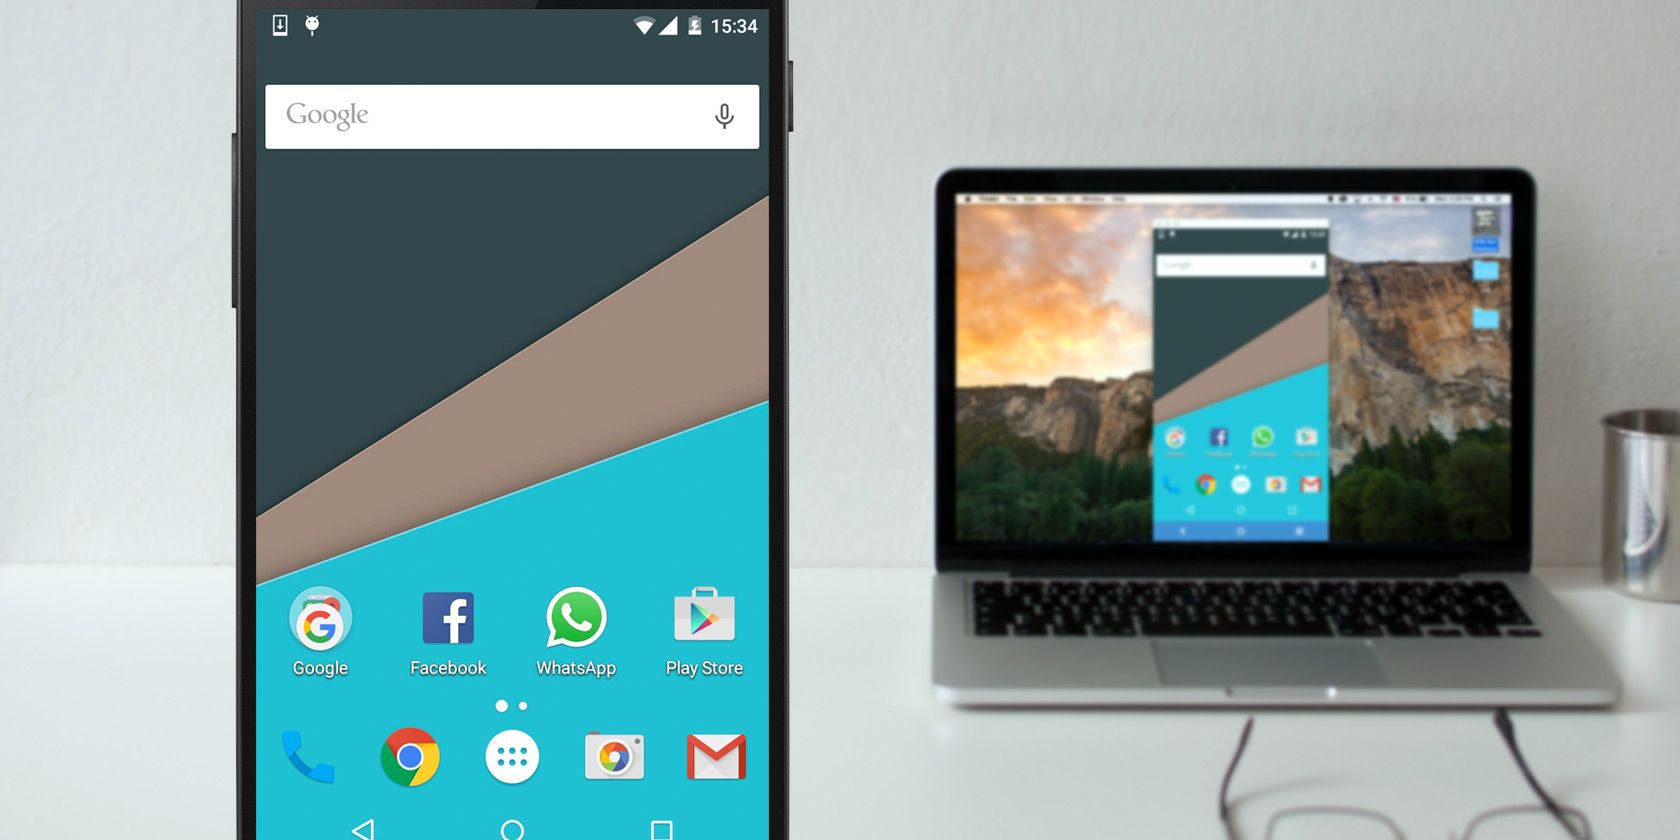 Mirror Your Android Screen To Pc Or Mac, How To Mirror Your Android Phone Screen On Windows 7 Pc